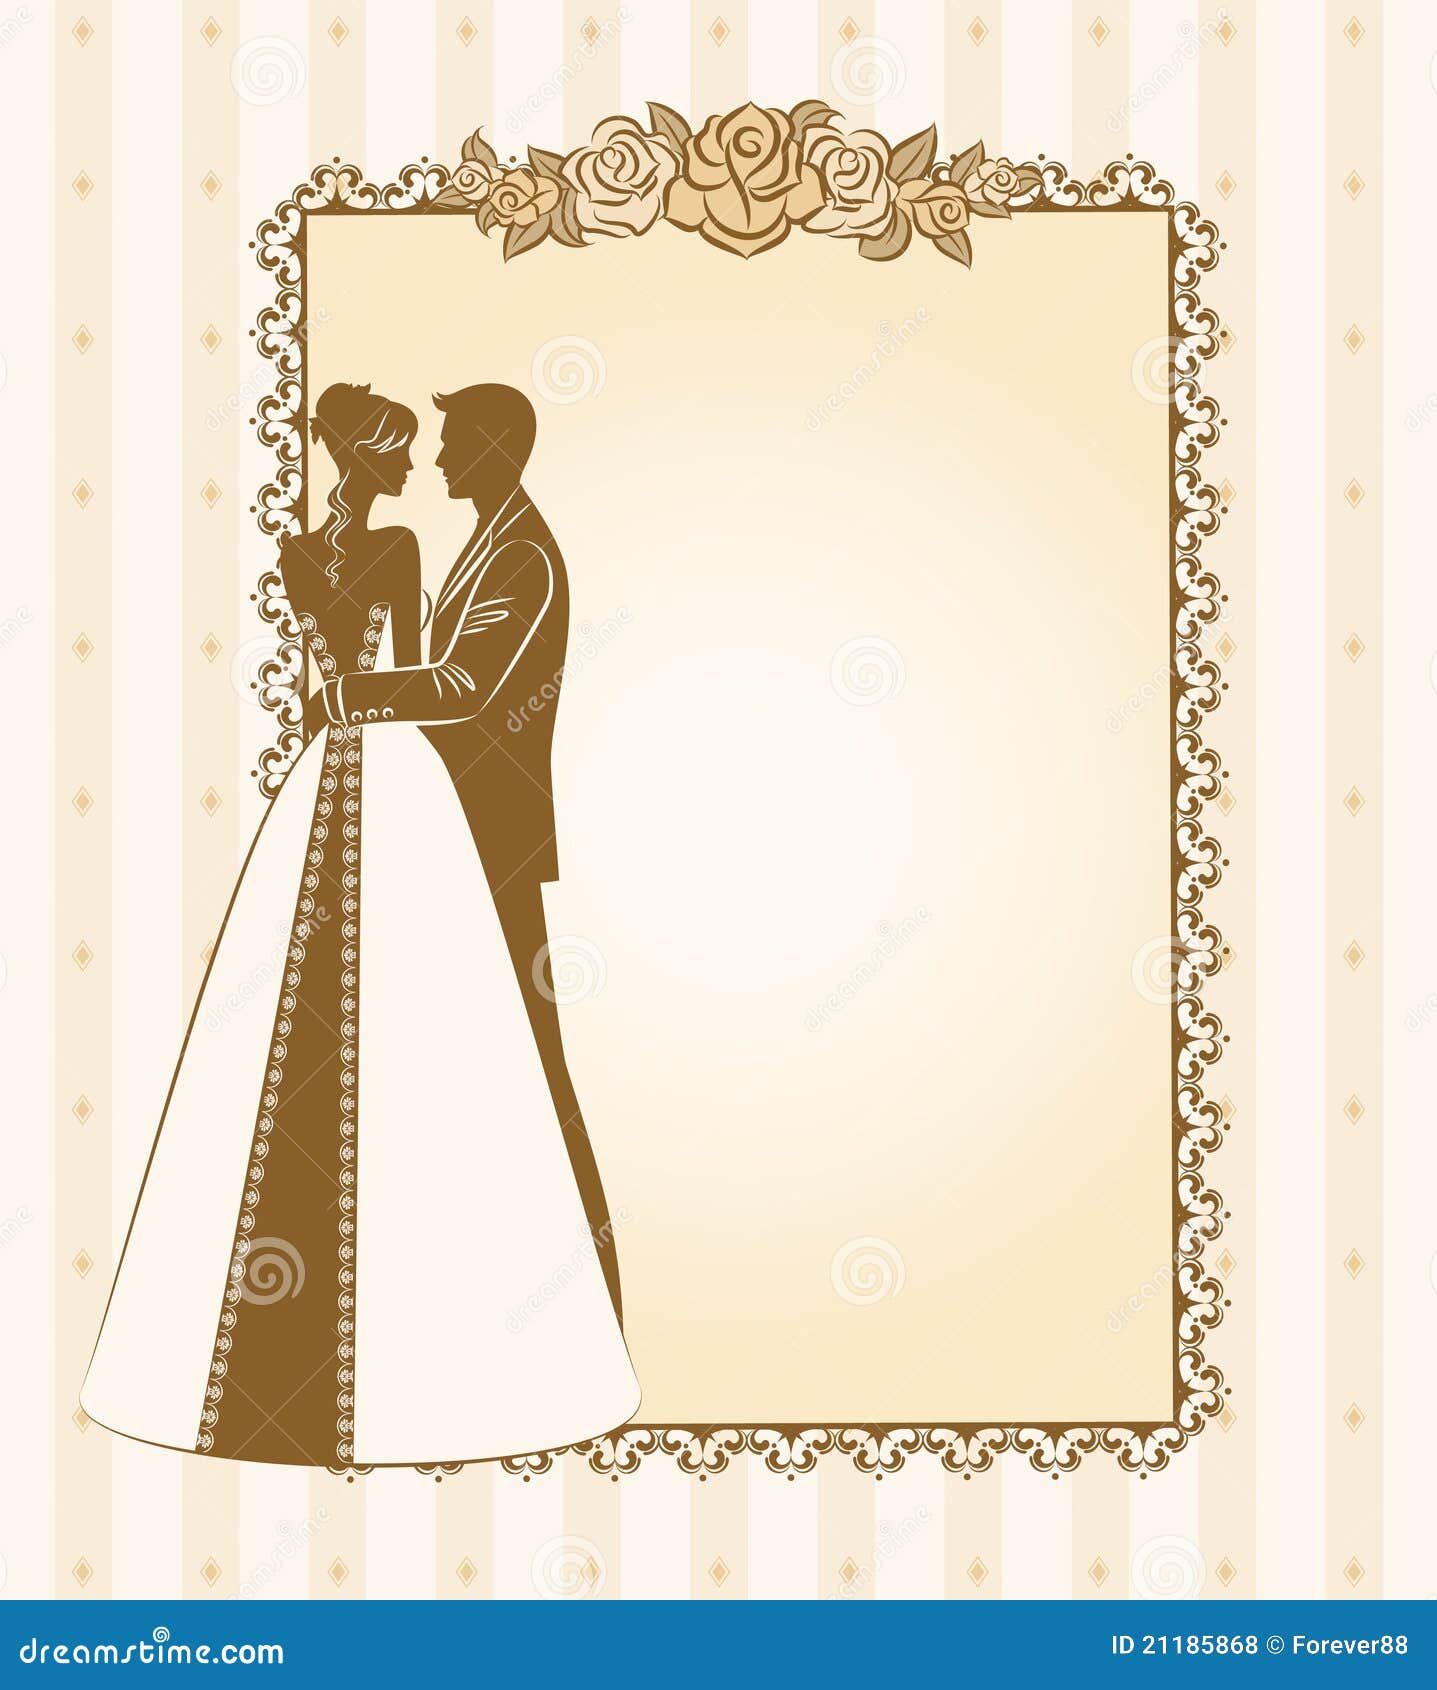 Bride And Groom's Silhouette Royalty Free Stock Photos 